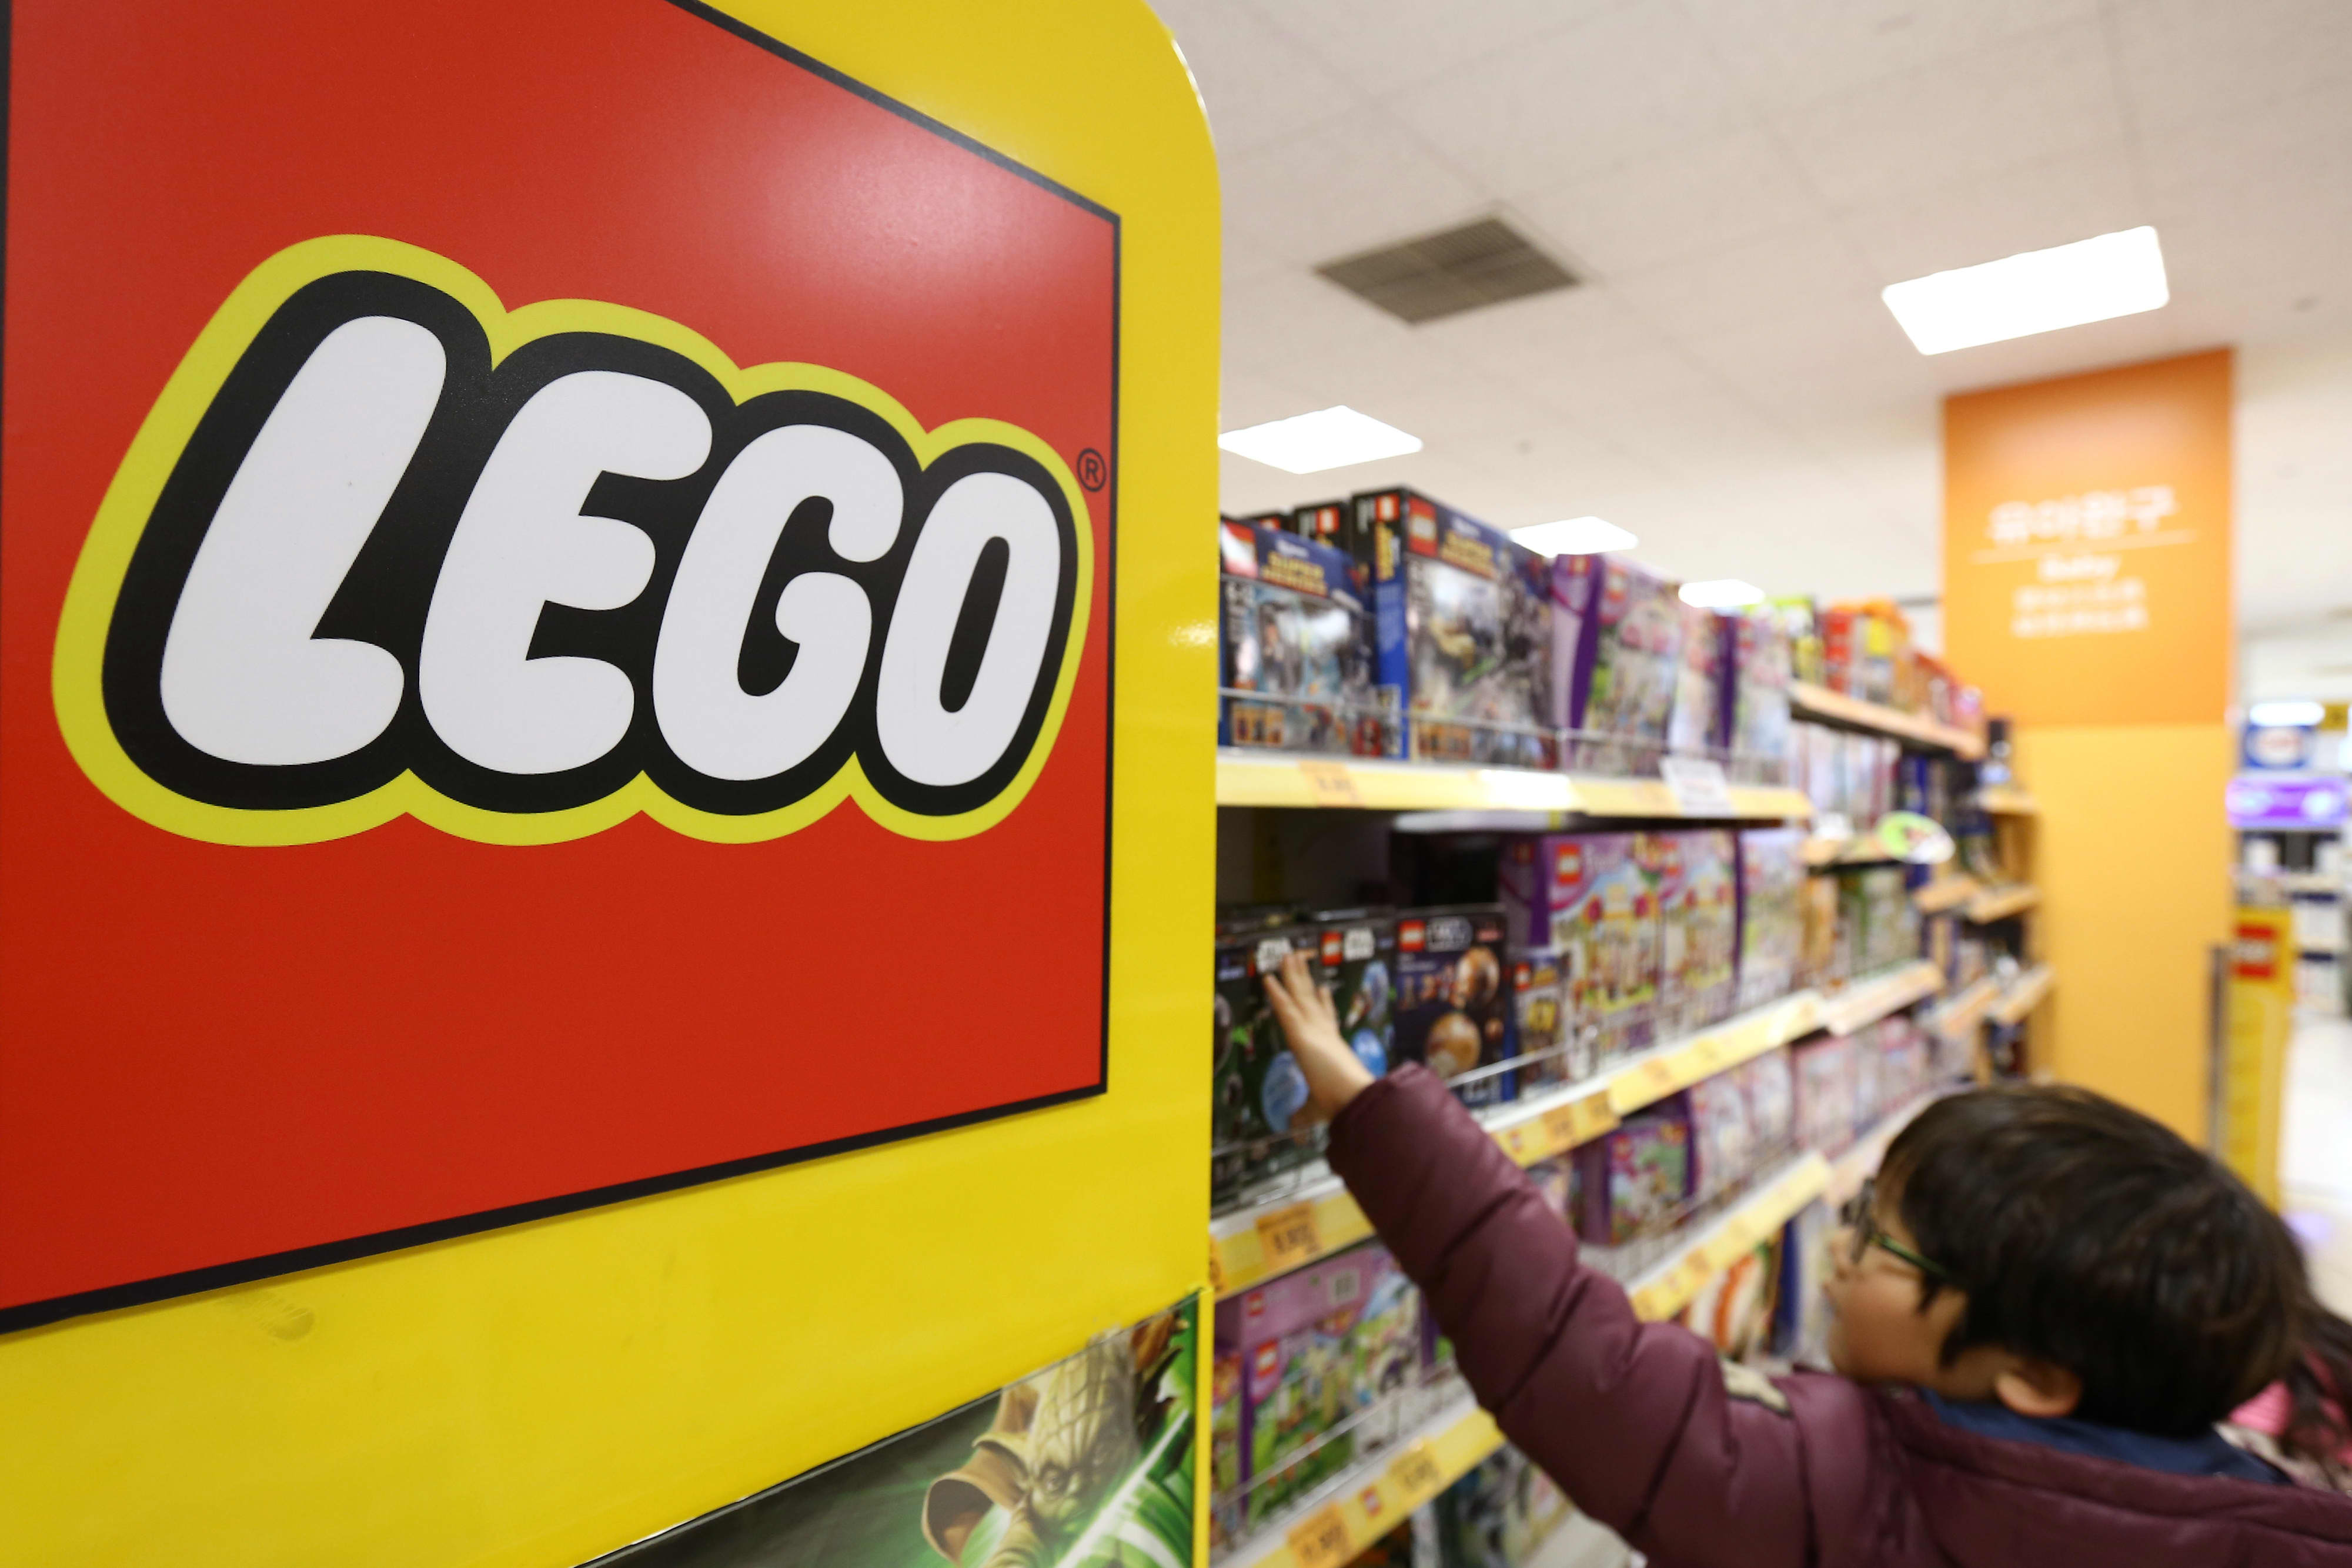 Lego sales increased in 2020, helped by e-commerce and China’s growth